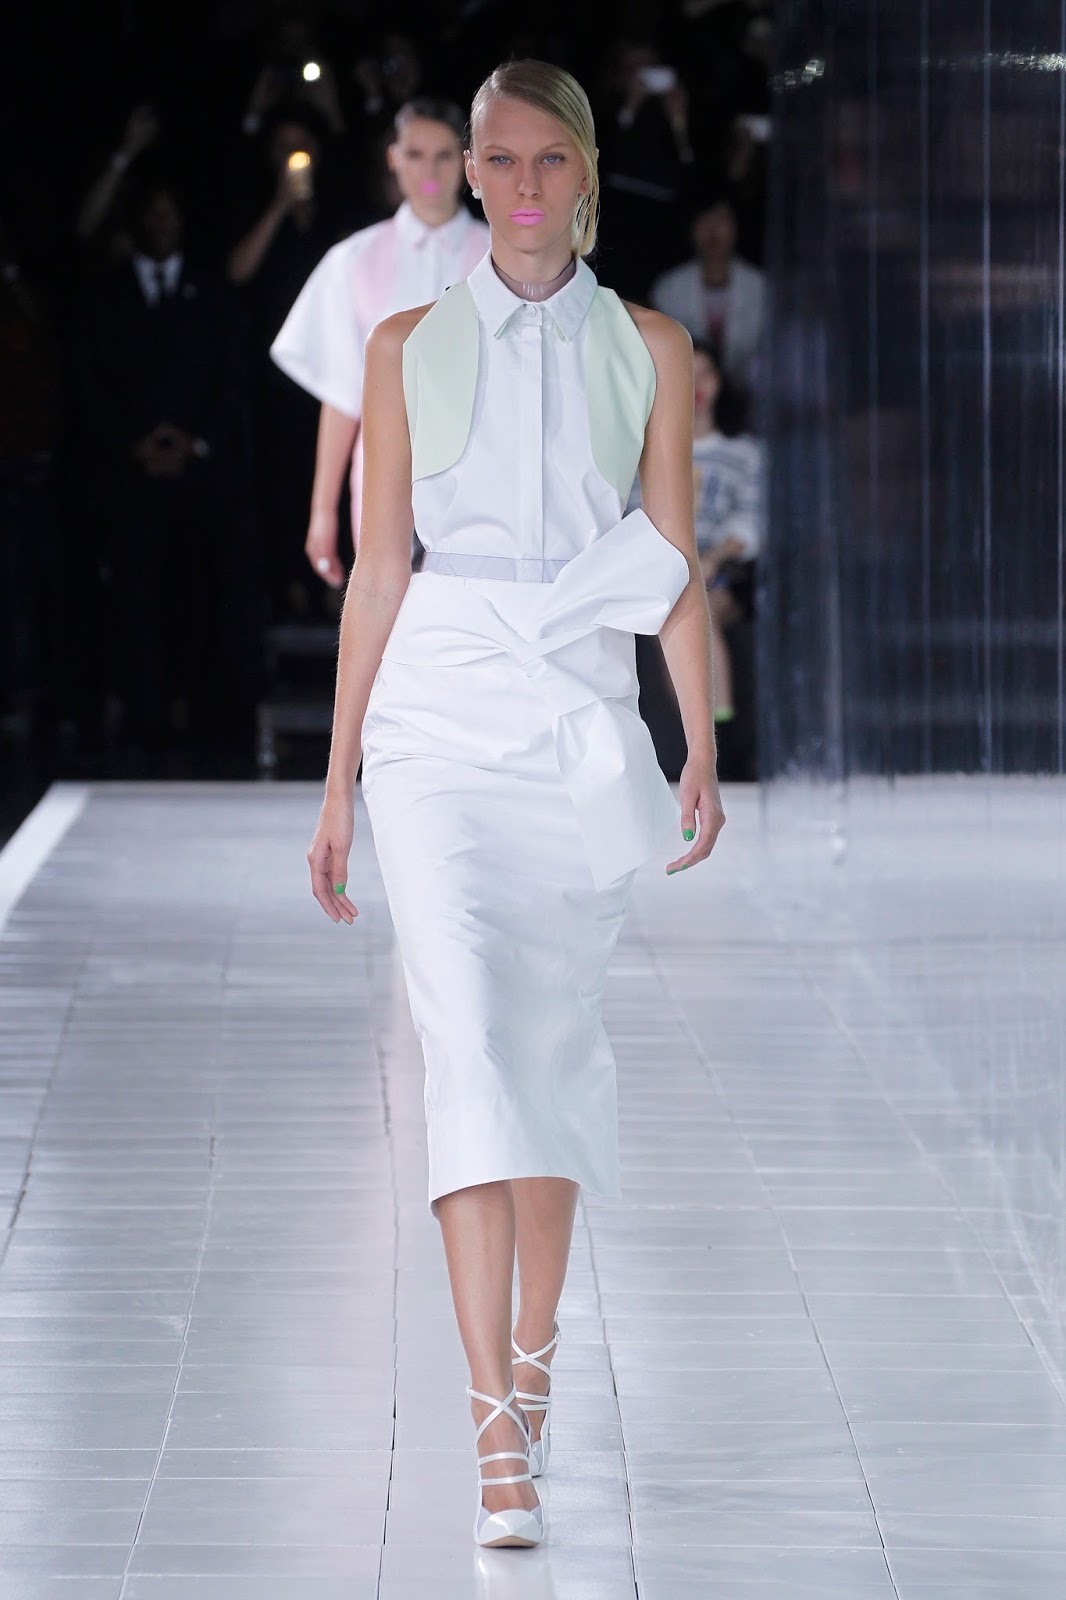 DIARY OF A CLOTHESHORSE: MUST SEE - CASADEI FOR PRABAL GURUNG SS14 ...